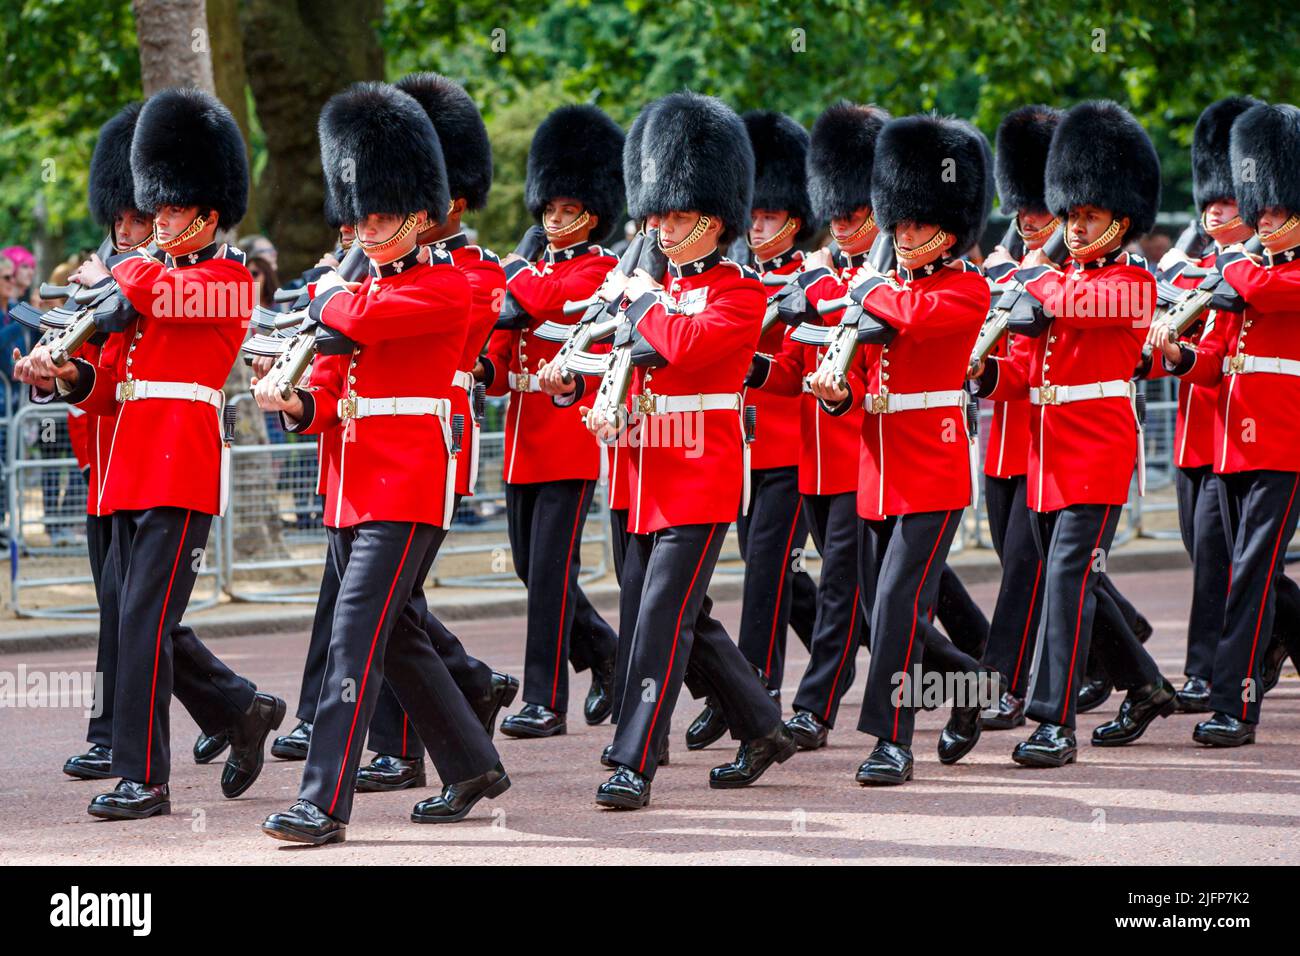 Irish Guards at Trooping the Colour, Colonel’s Review in The Mall, London, England, United Kingdom on Saturday, May 28, 2022.P Stock Photo